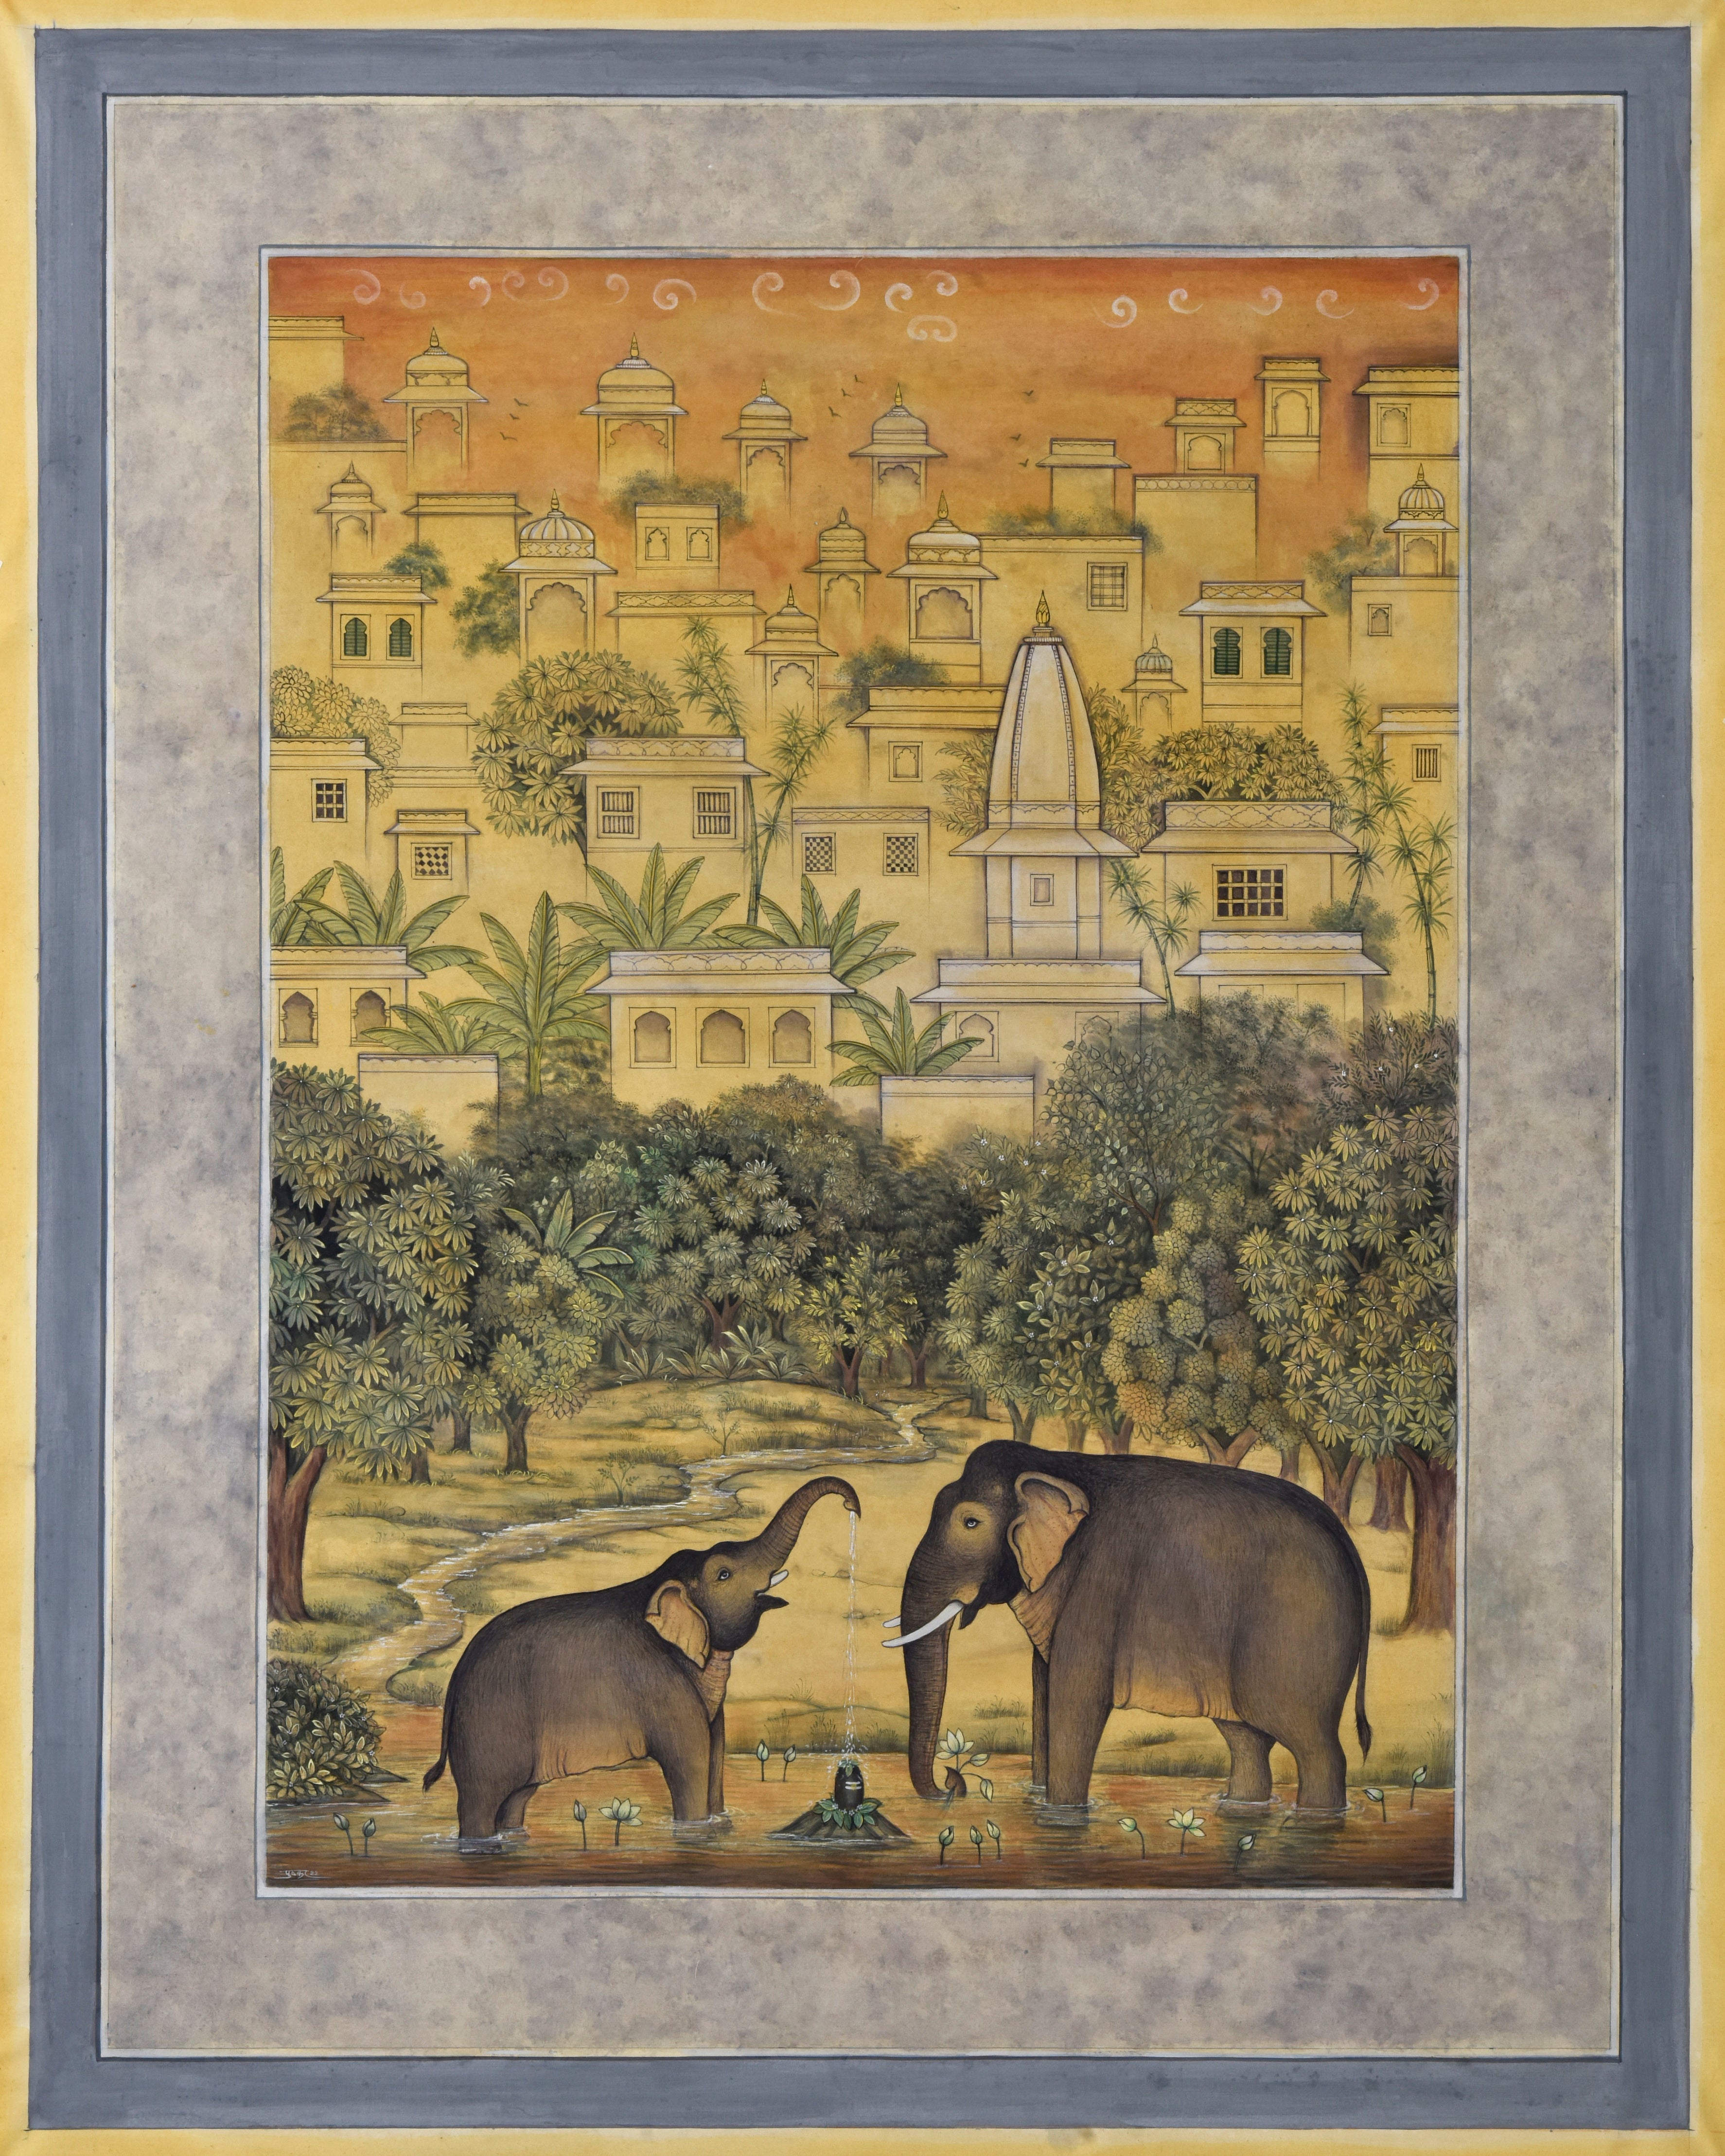 Pichwai Painting | Elephants in Udaipur | Indian Art